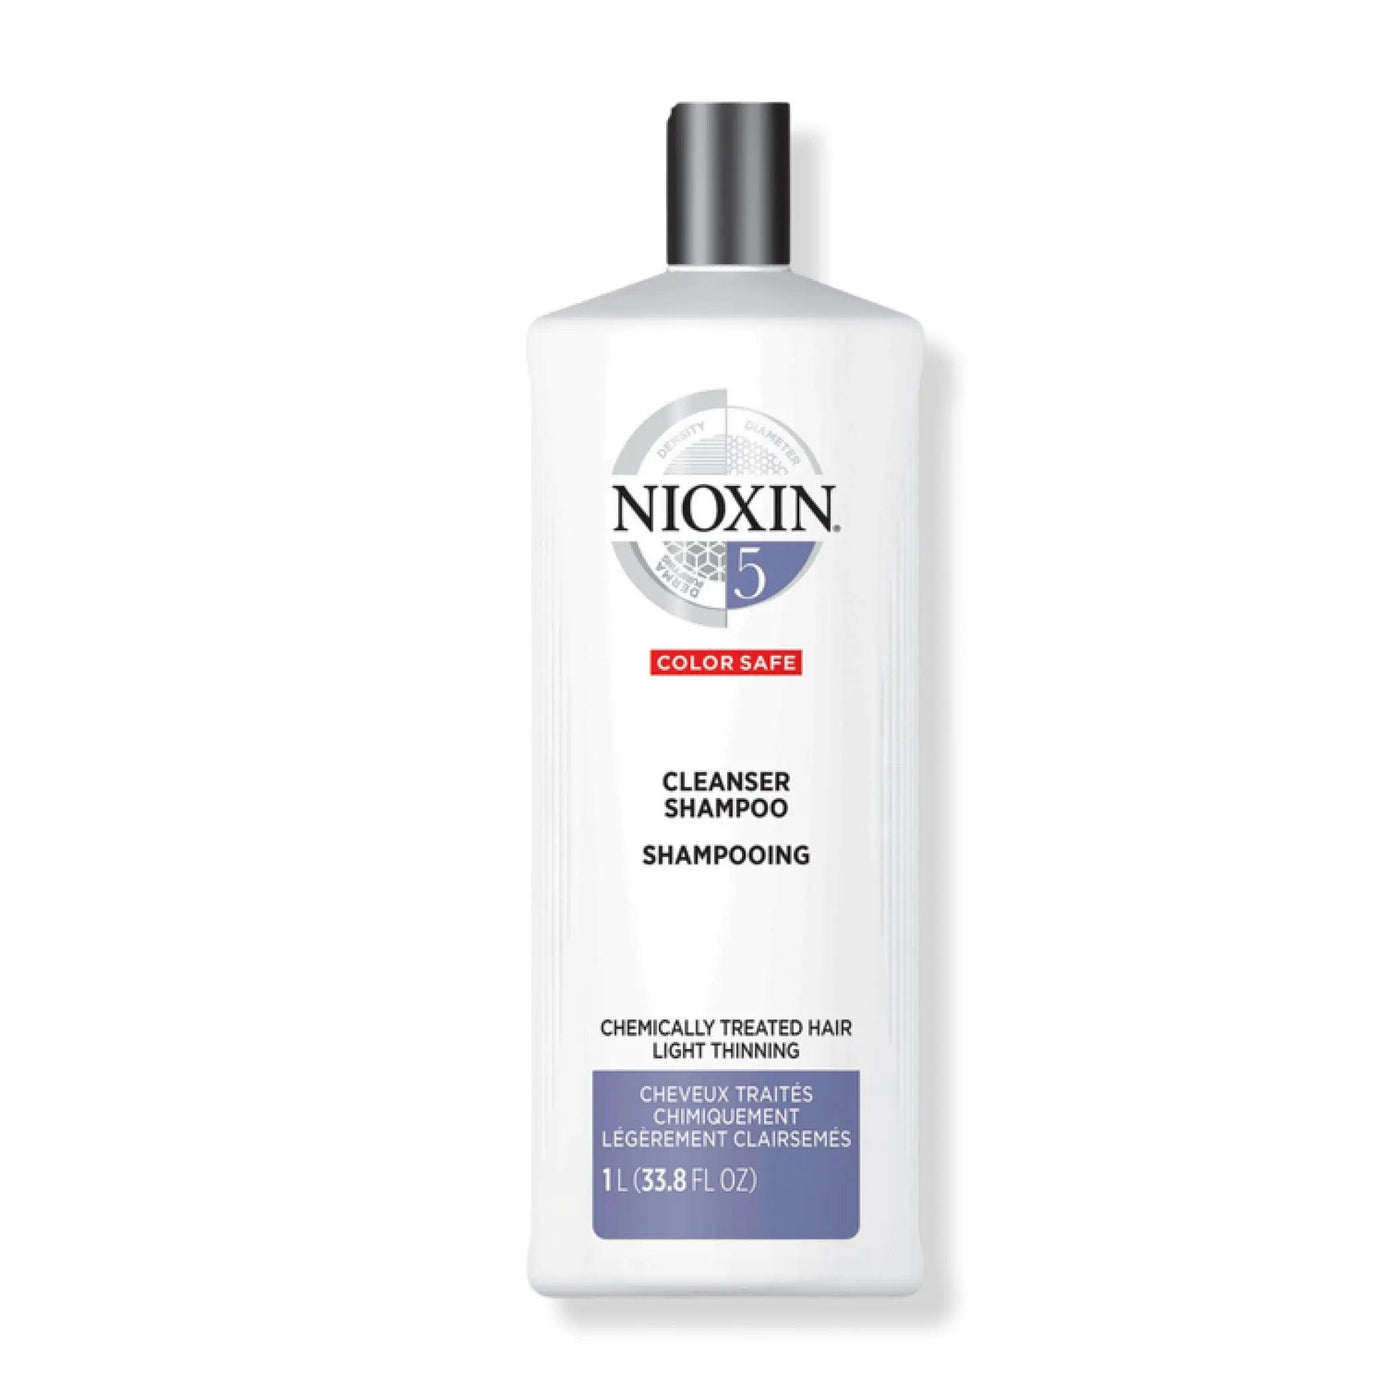 System 5 Cleanser Shampoo Nioxin Boutique Deauville